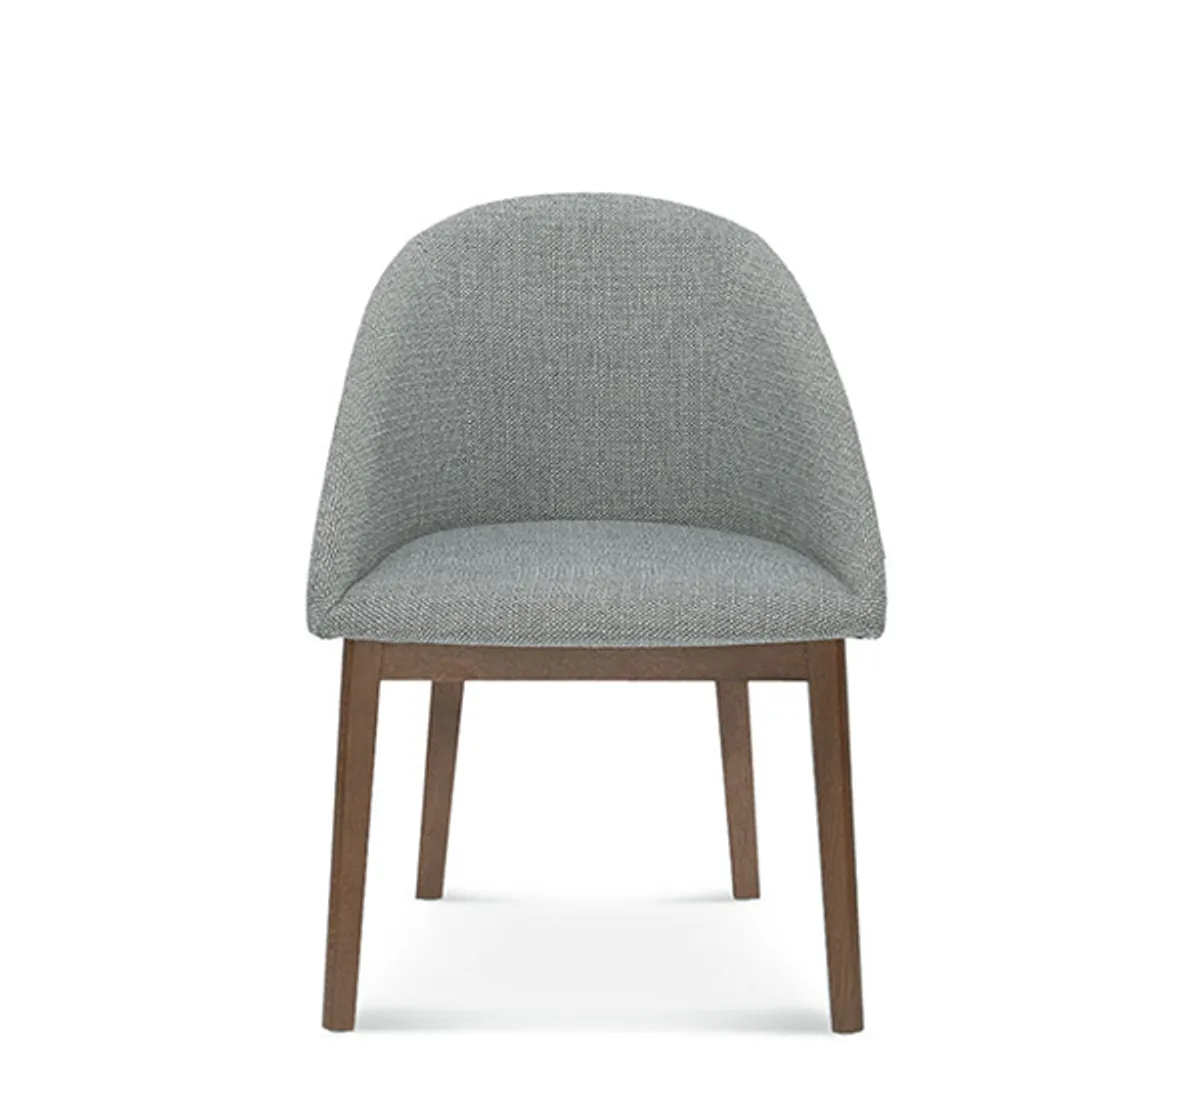 Luca Chair Upholstered For Commercial Use By Insideoutcontracts